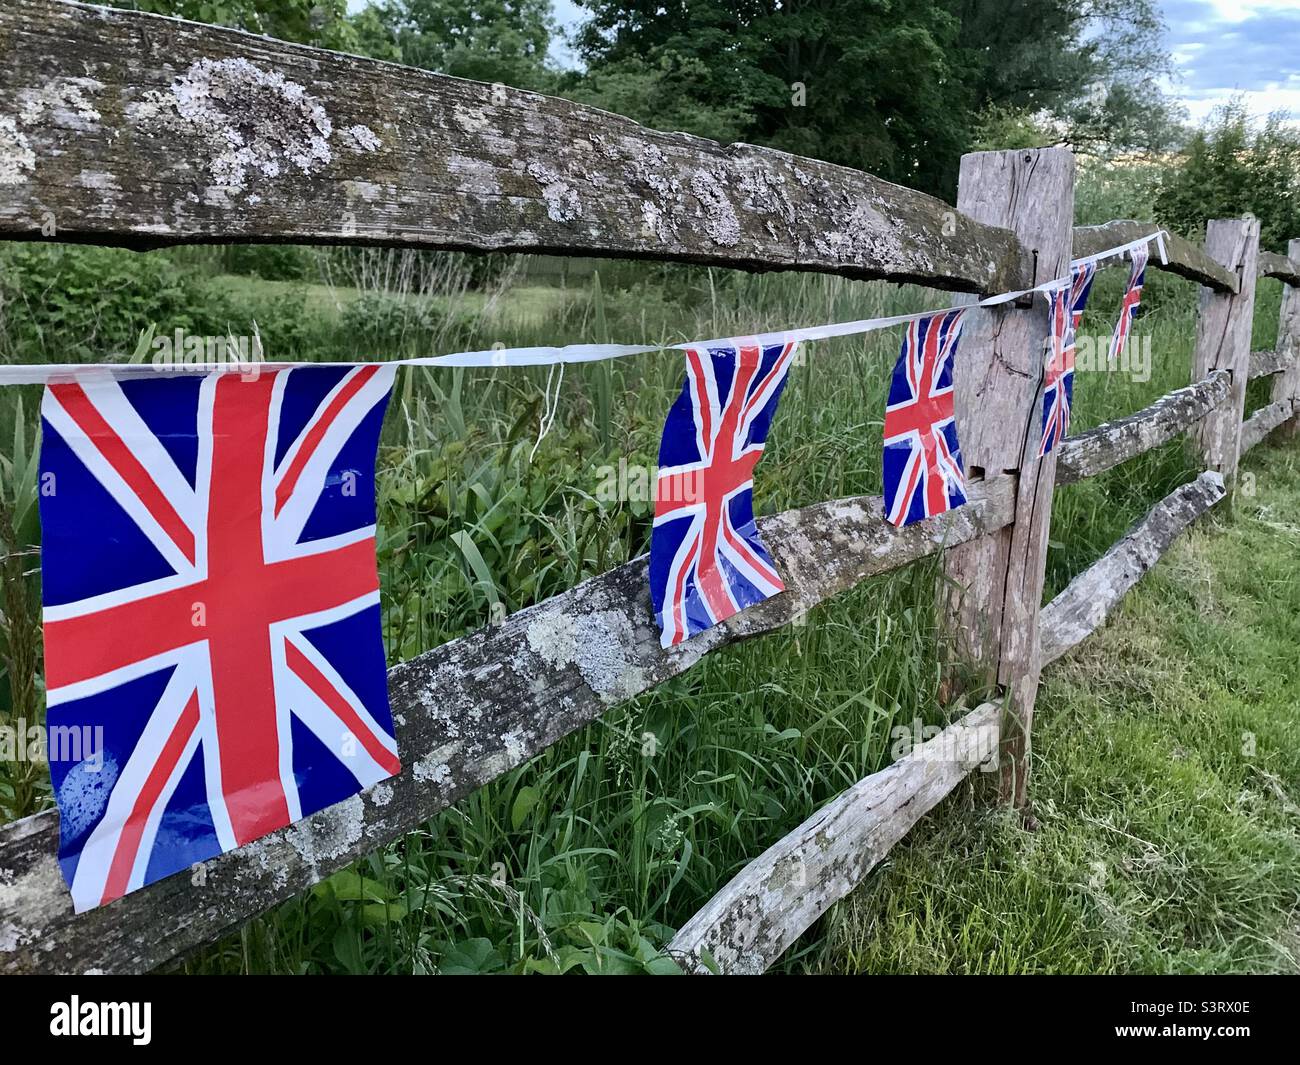 Jubilee Union Jack flags bunting hanging on wooden fence Stock Photo